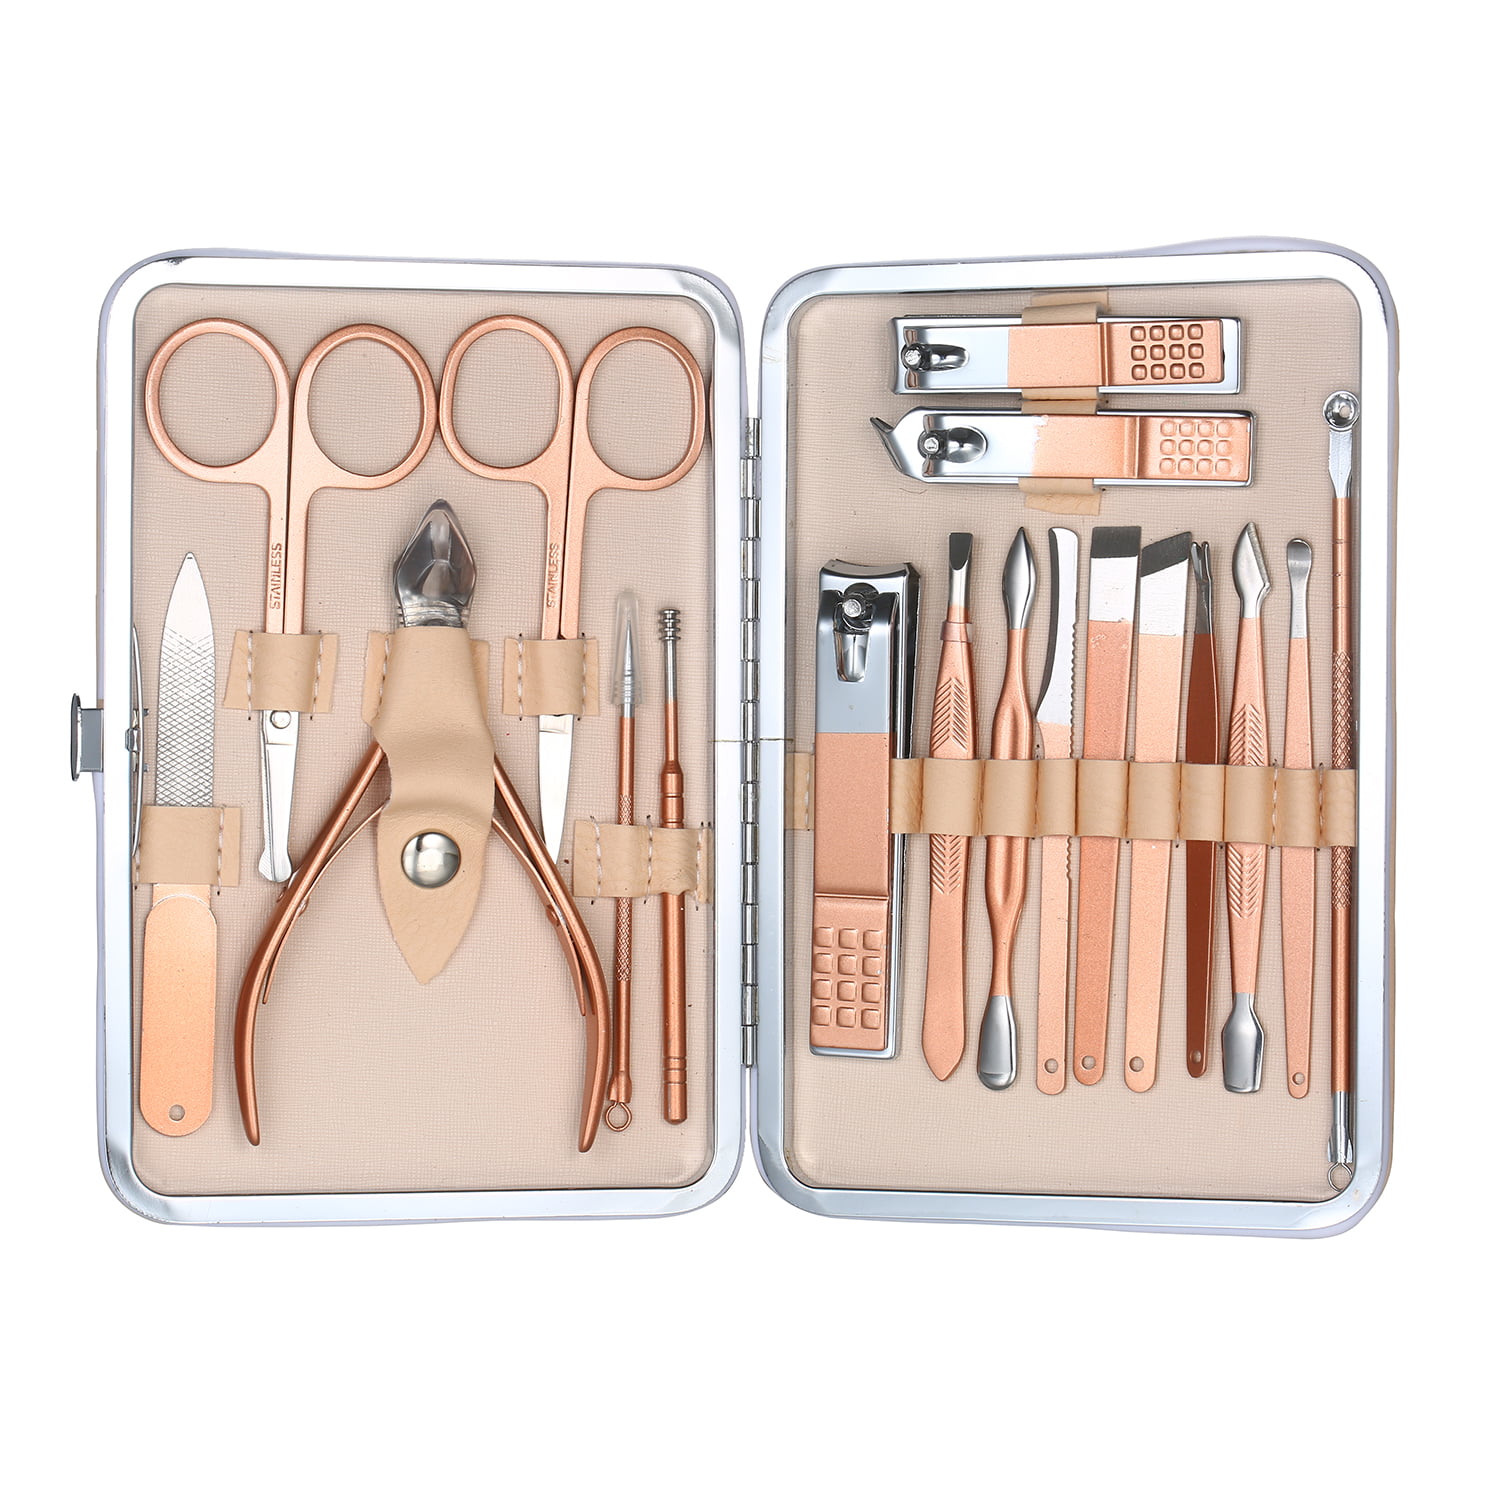 Grooming Set 2 brushes in a leather case vintage small travel kit